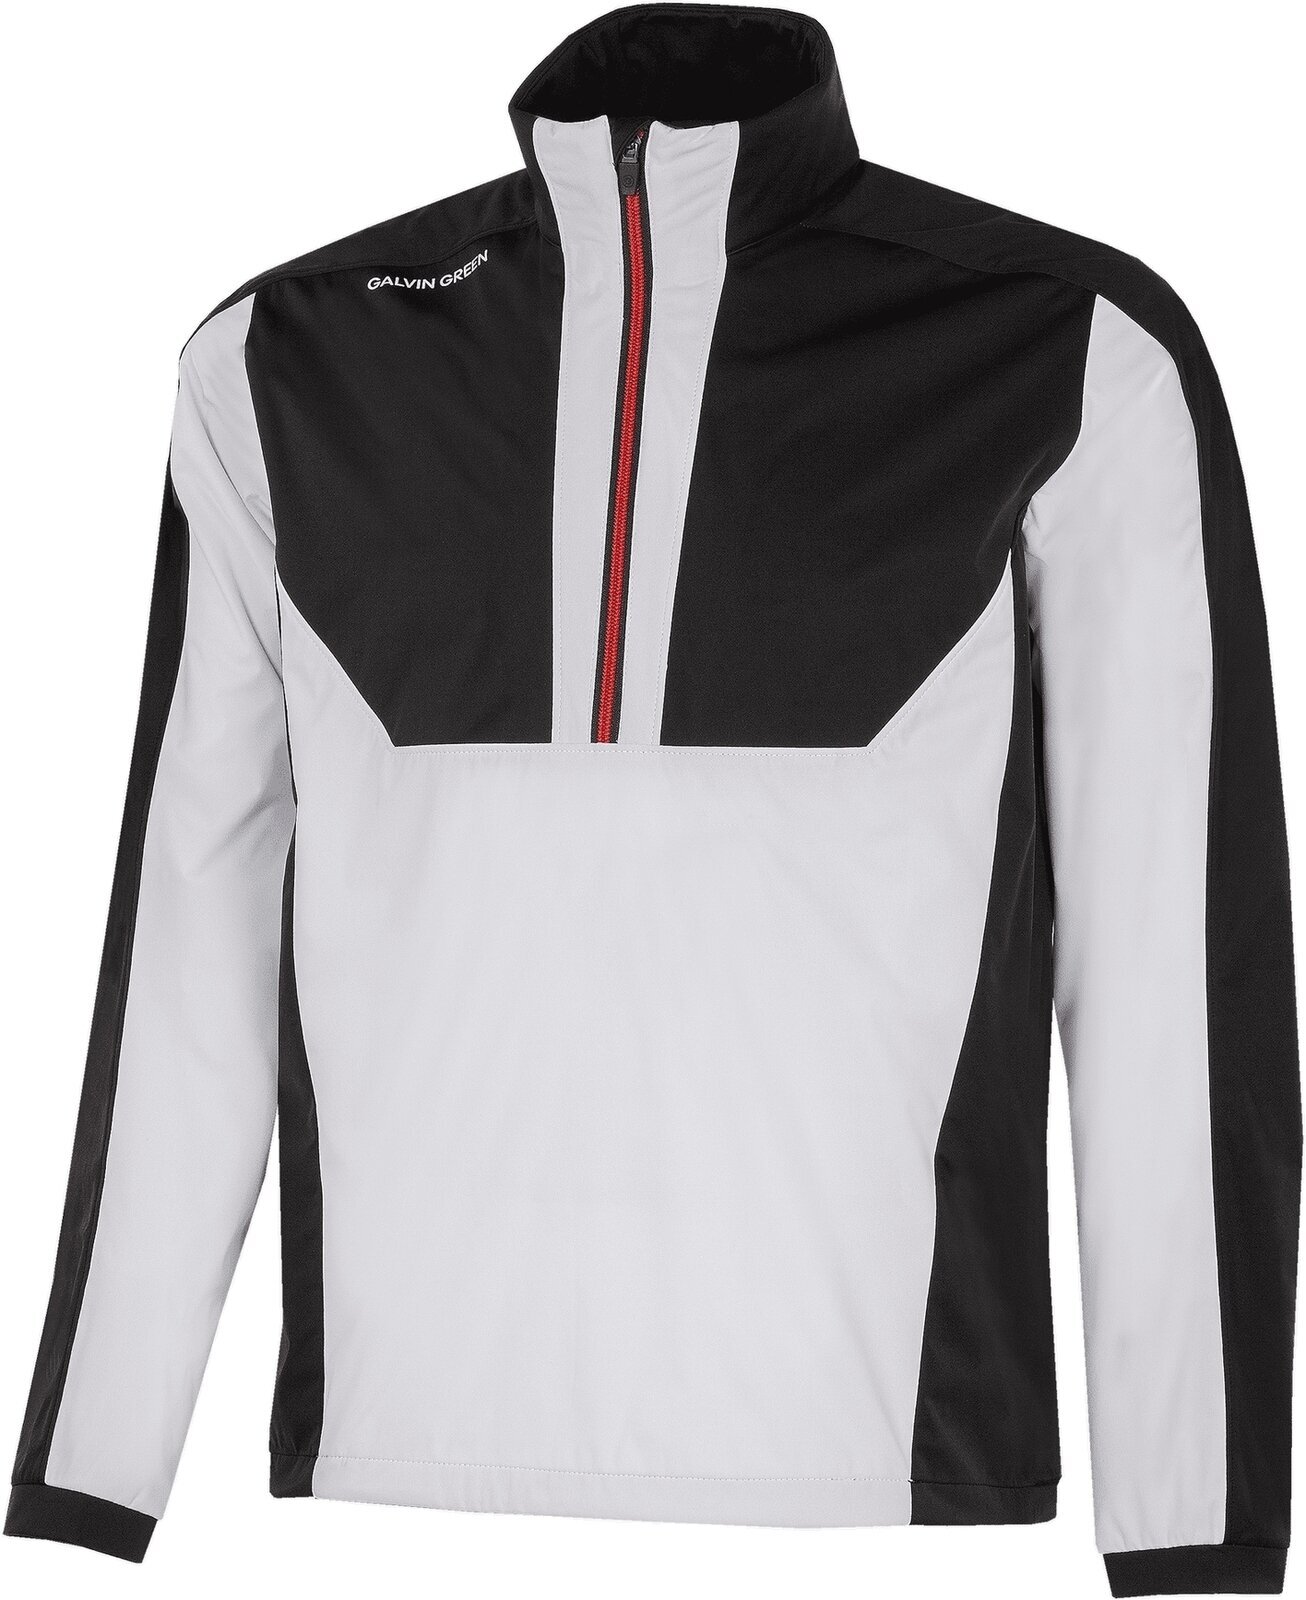 Bunda Galvin Green Lawrence Mens Windproof And Water Repellent Jacket White/Black/Red XL